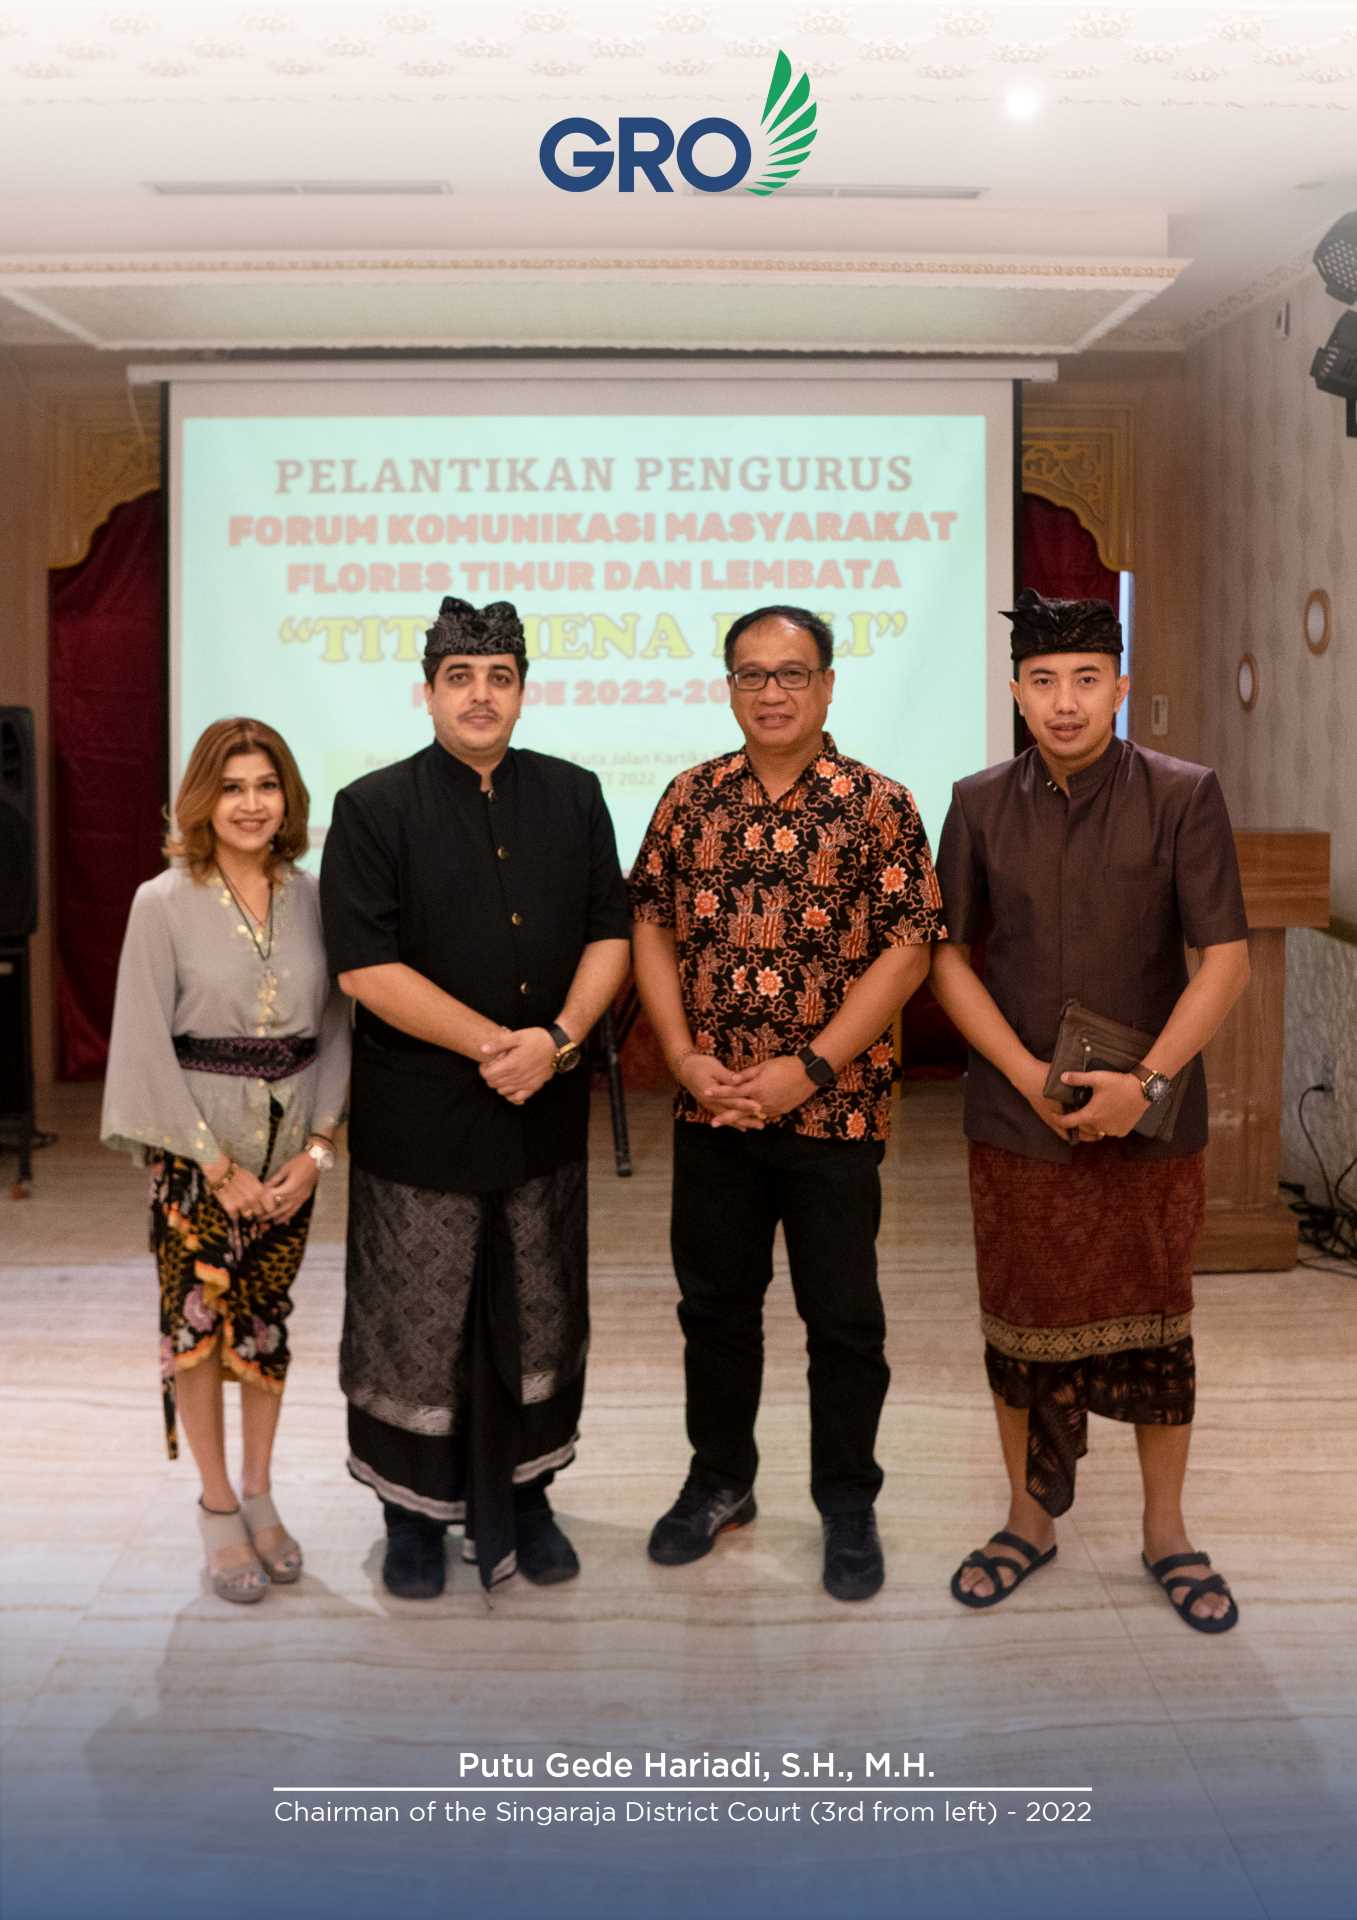 Putu Gede Hariadi, S.H., M.H. is the Chairman of the Singaraja District Court (3rd from left) - 2022